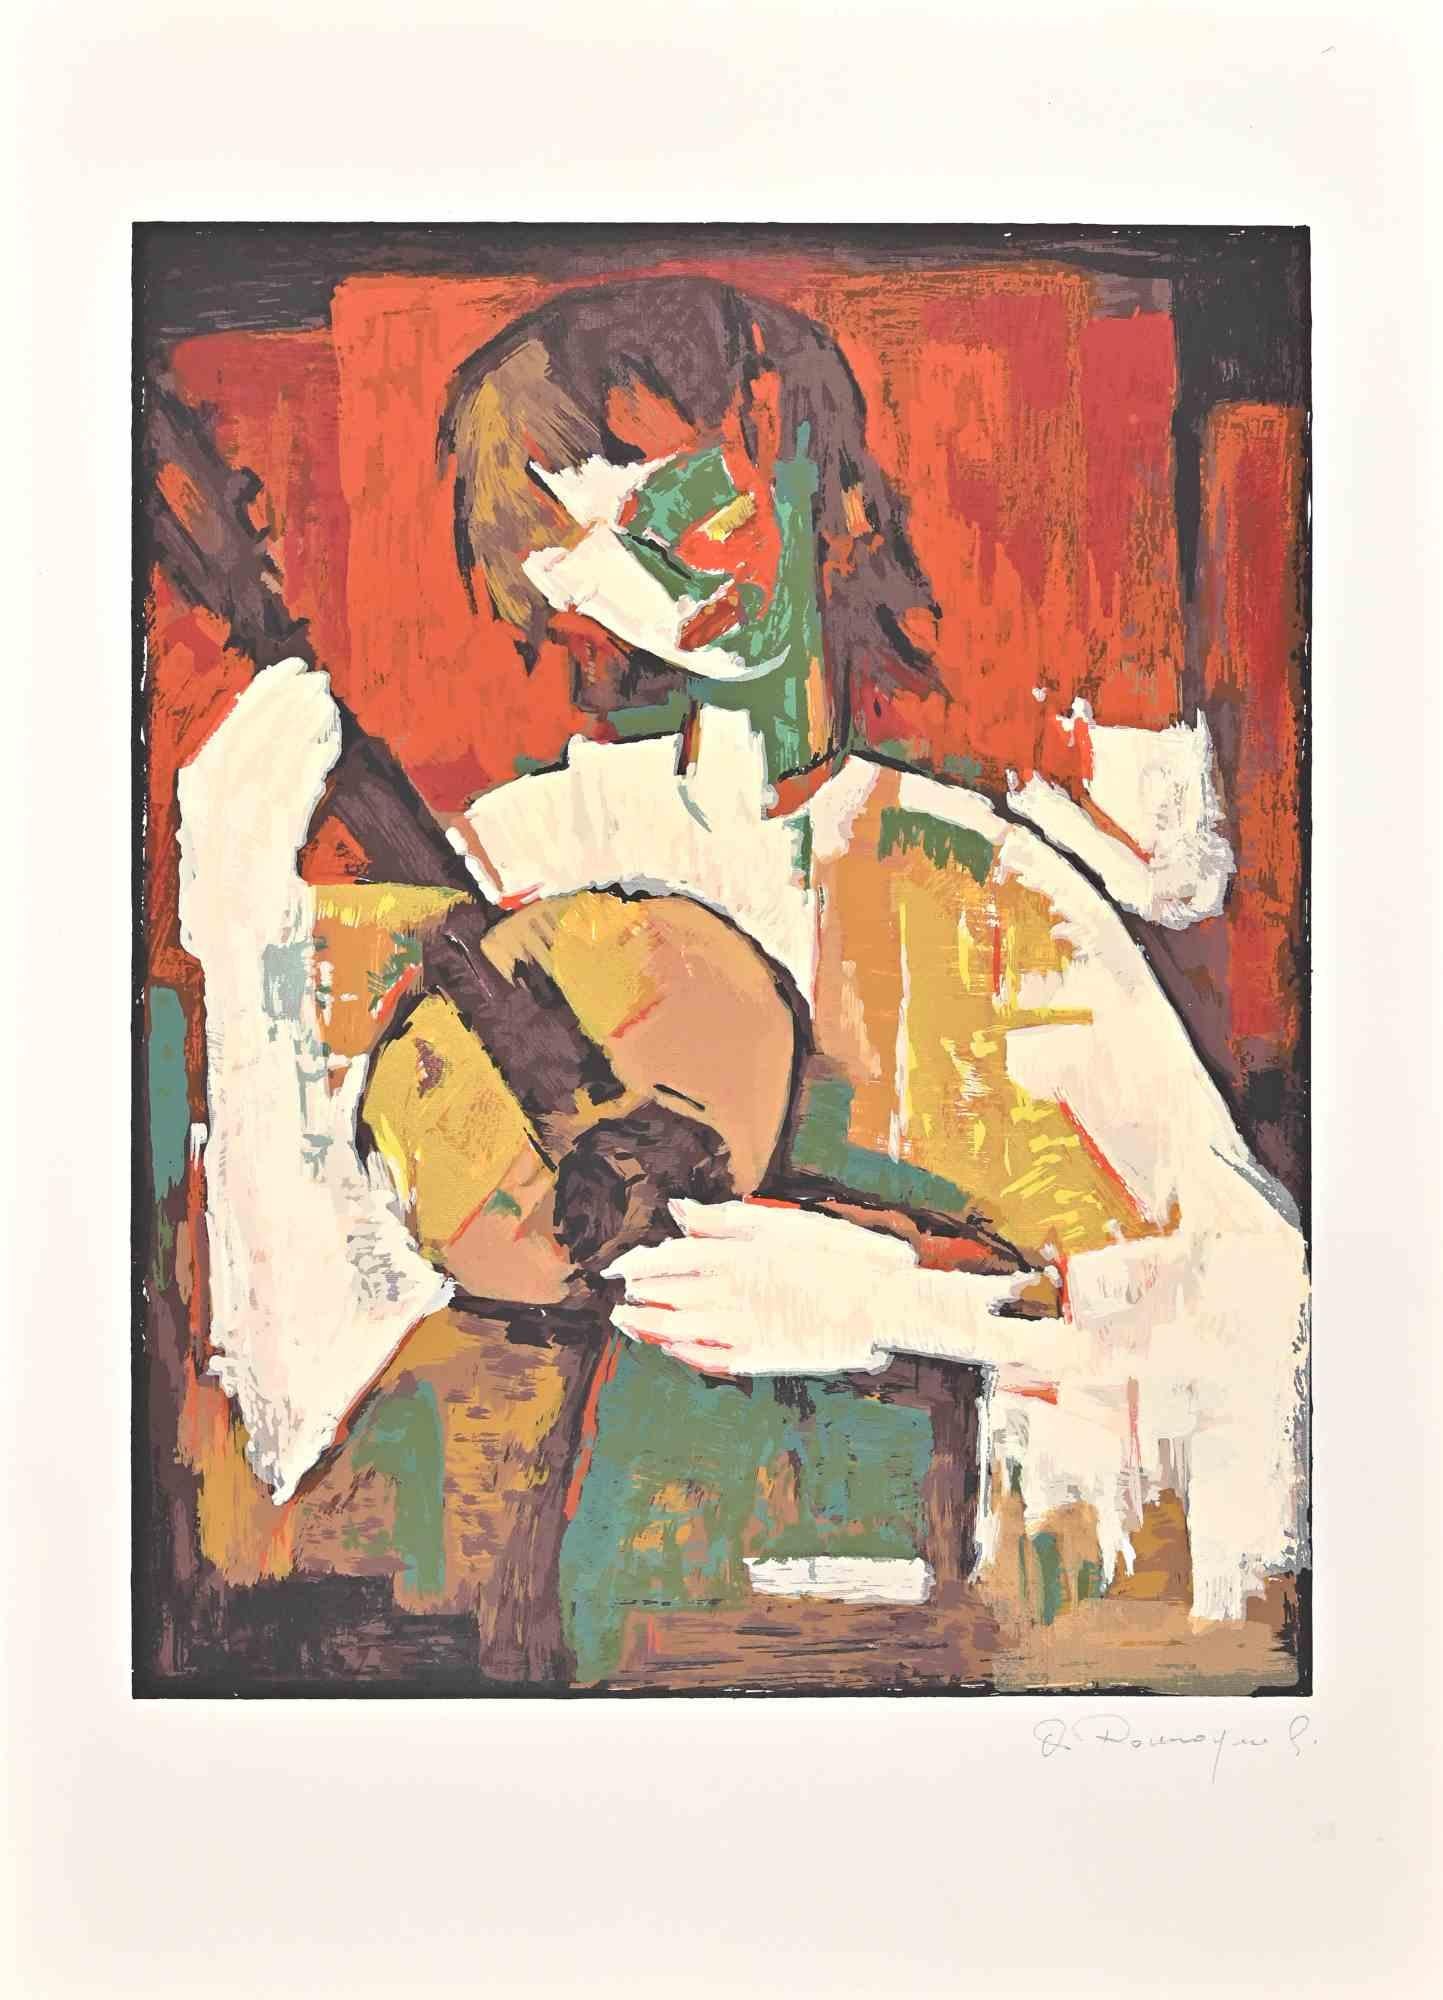 Guitar Player is a Lithograph realized by Alfredo Romagnoli in 1970s.

The artwork is in good condition on a white cardboard.

Hand-signed by the artist on the lower right corner.

Alfredo Romagnoli (January 5, 1915 in Genzano di Roma - March 21,